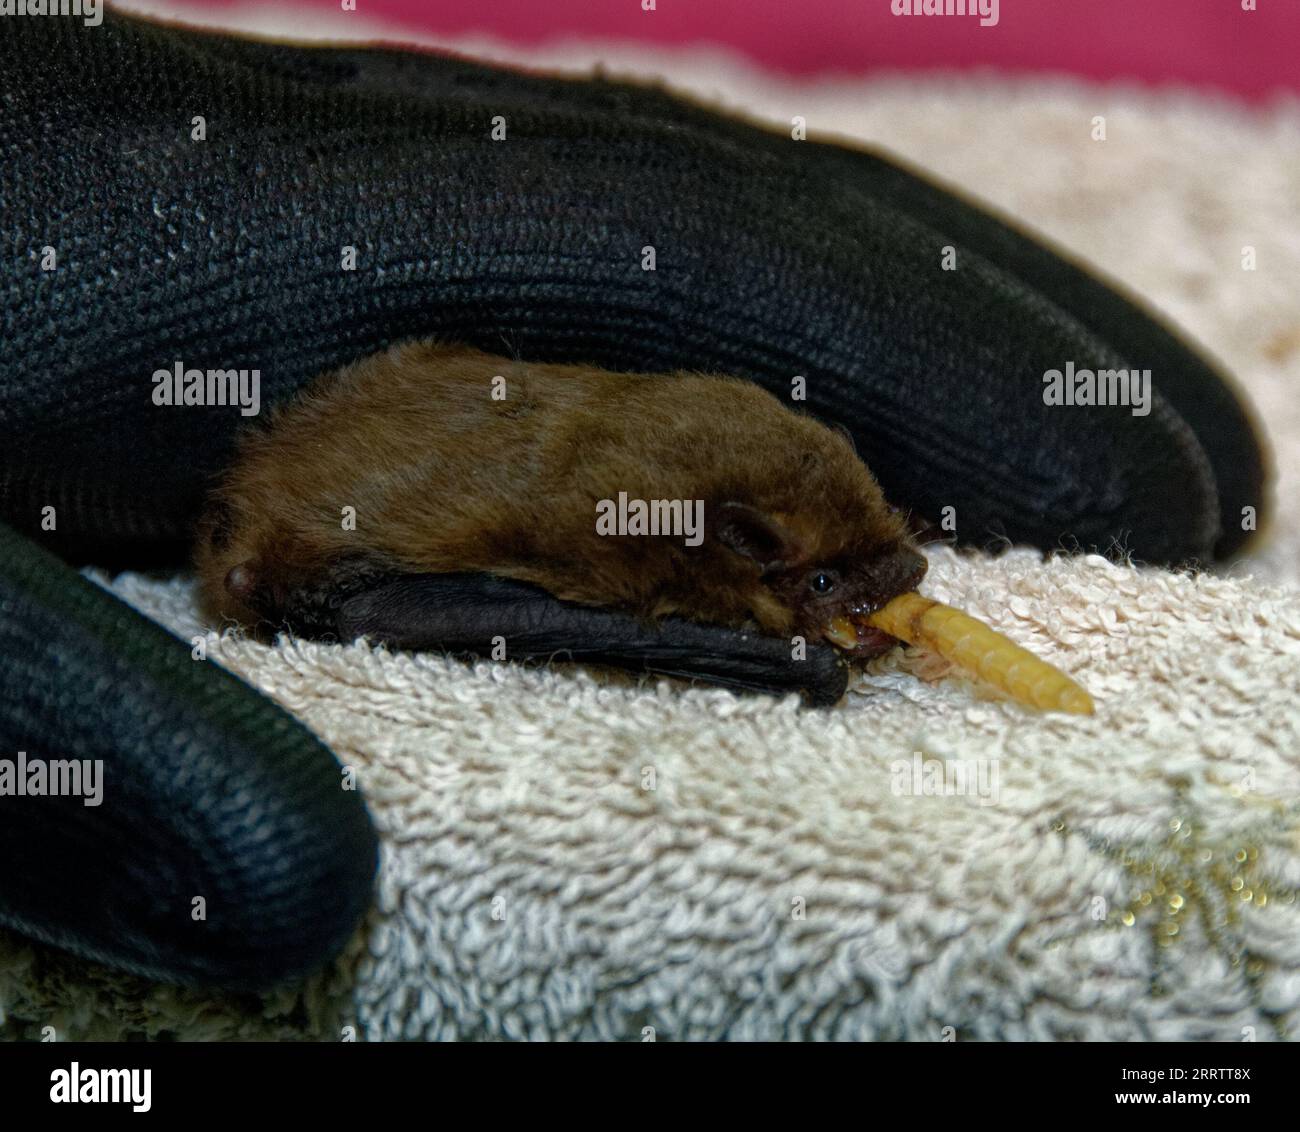 Pipistrelle Bat (Pipistrellus pipistrellus) Juvenile being hand fed mealworm. Stock Photo